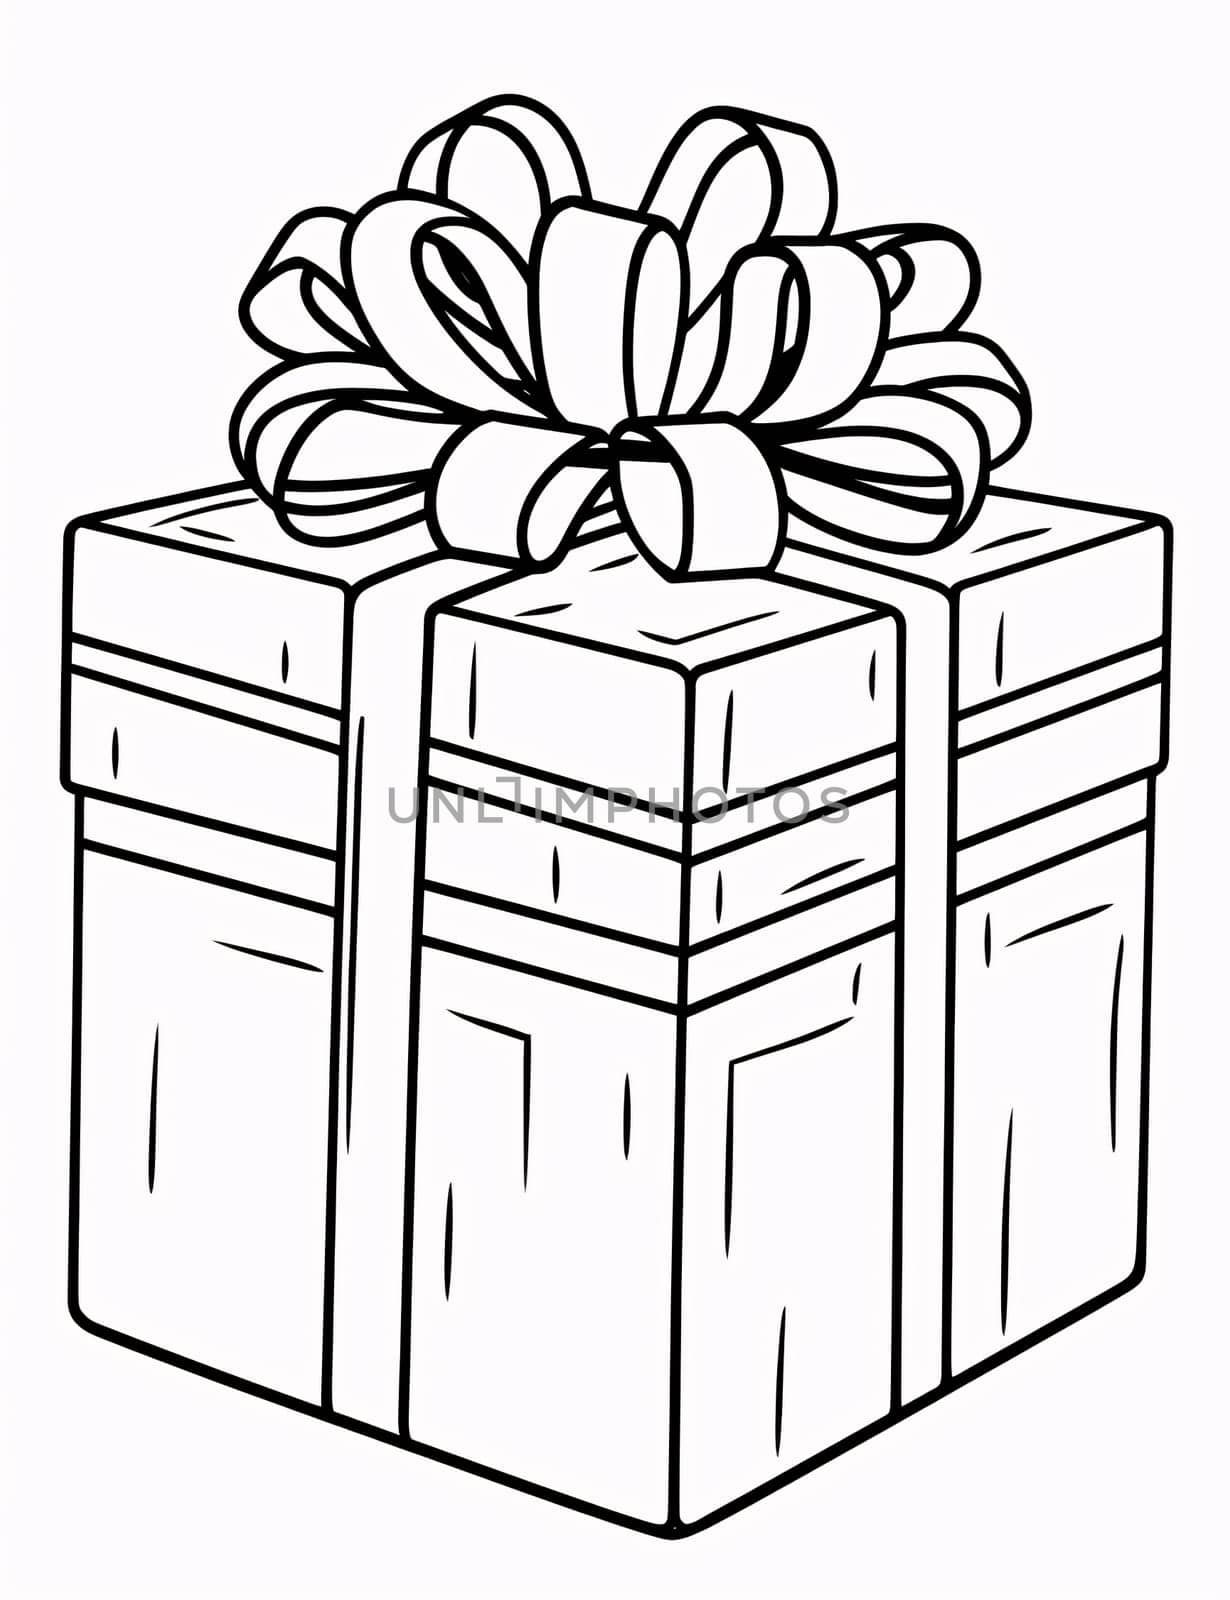 Black and white coloring card; gift with a bow. Gifts as a day symbol of present and love. by ThemesS